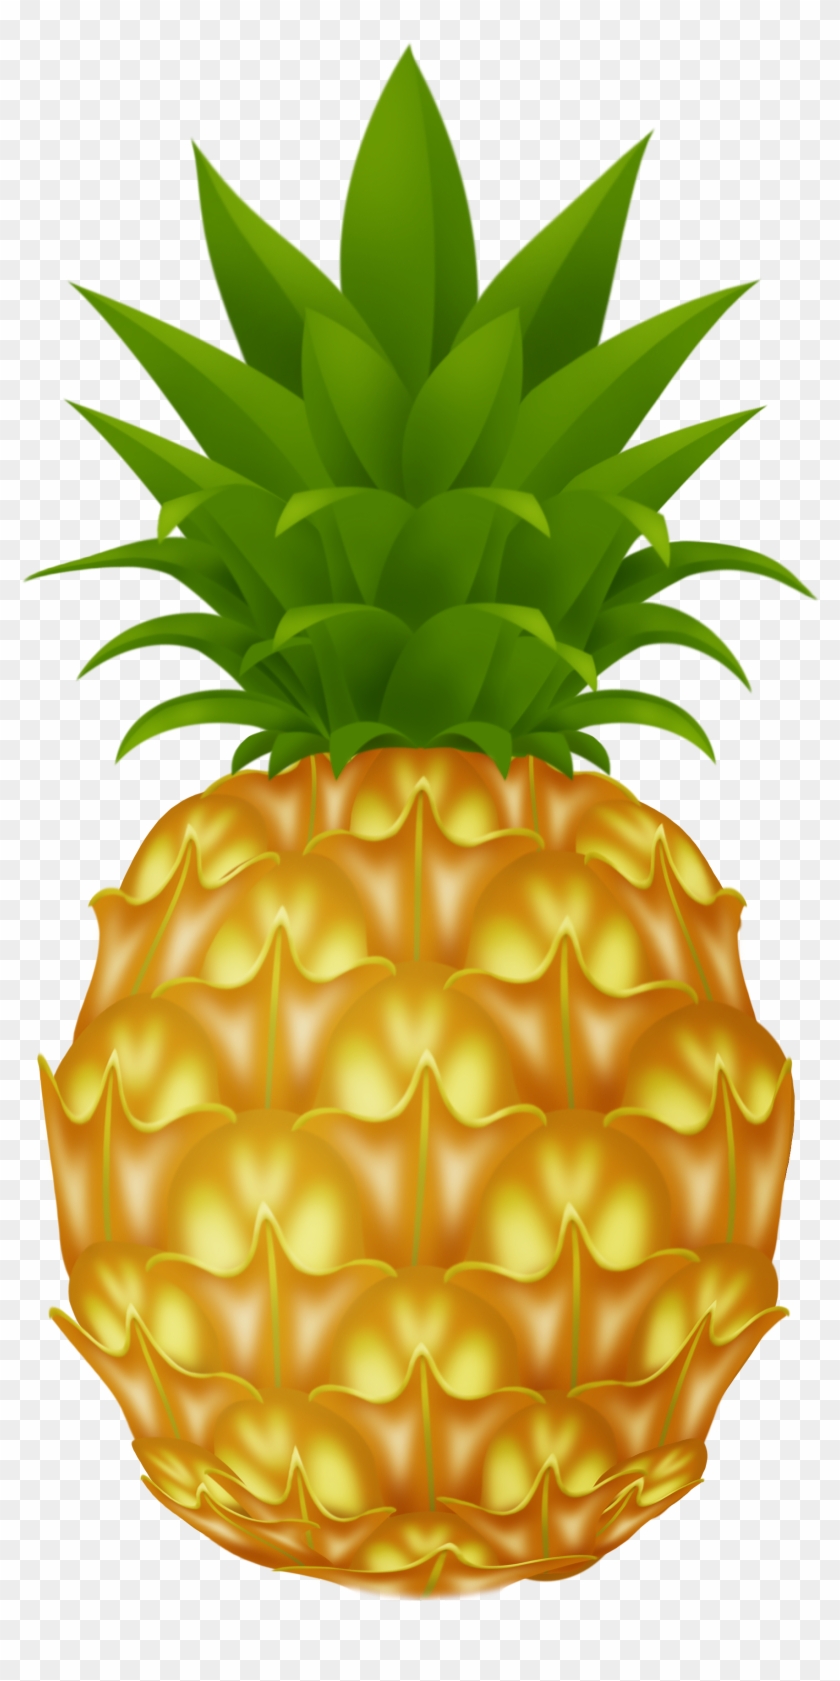 49 Free Pineapple Clipart - Pineapple Png #849454